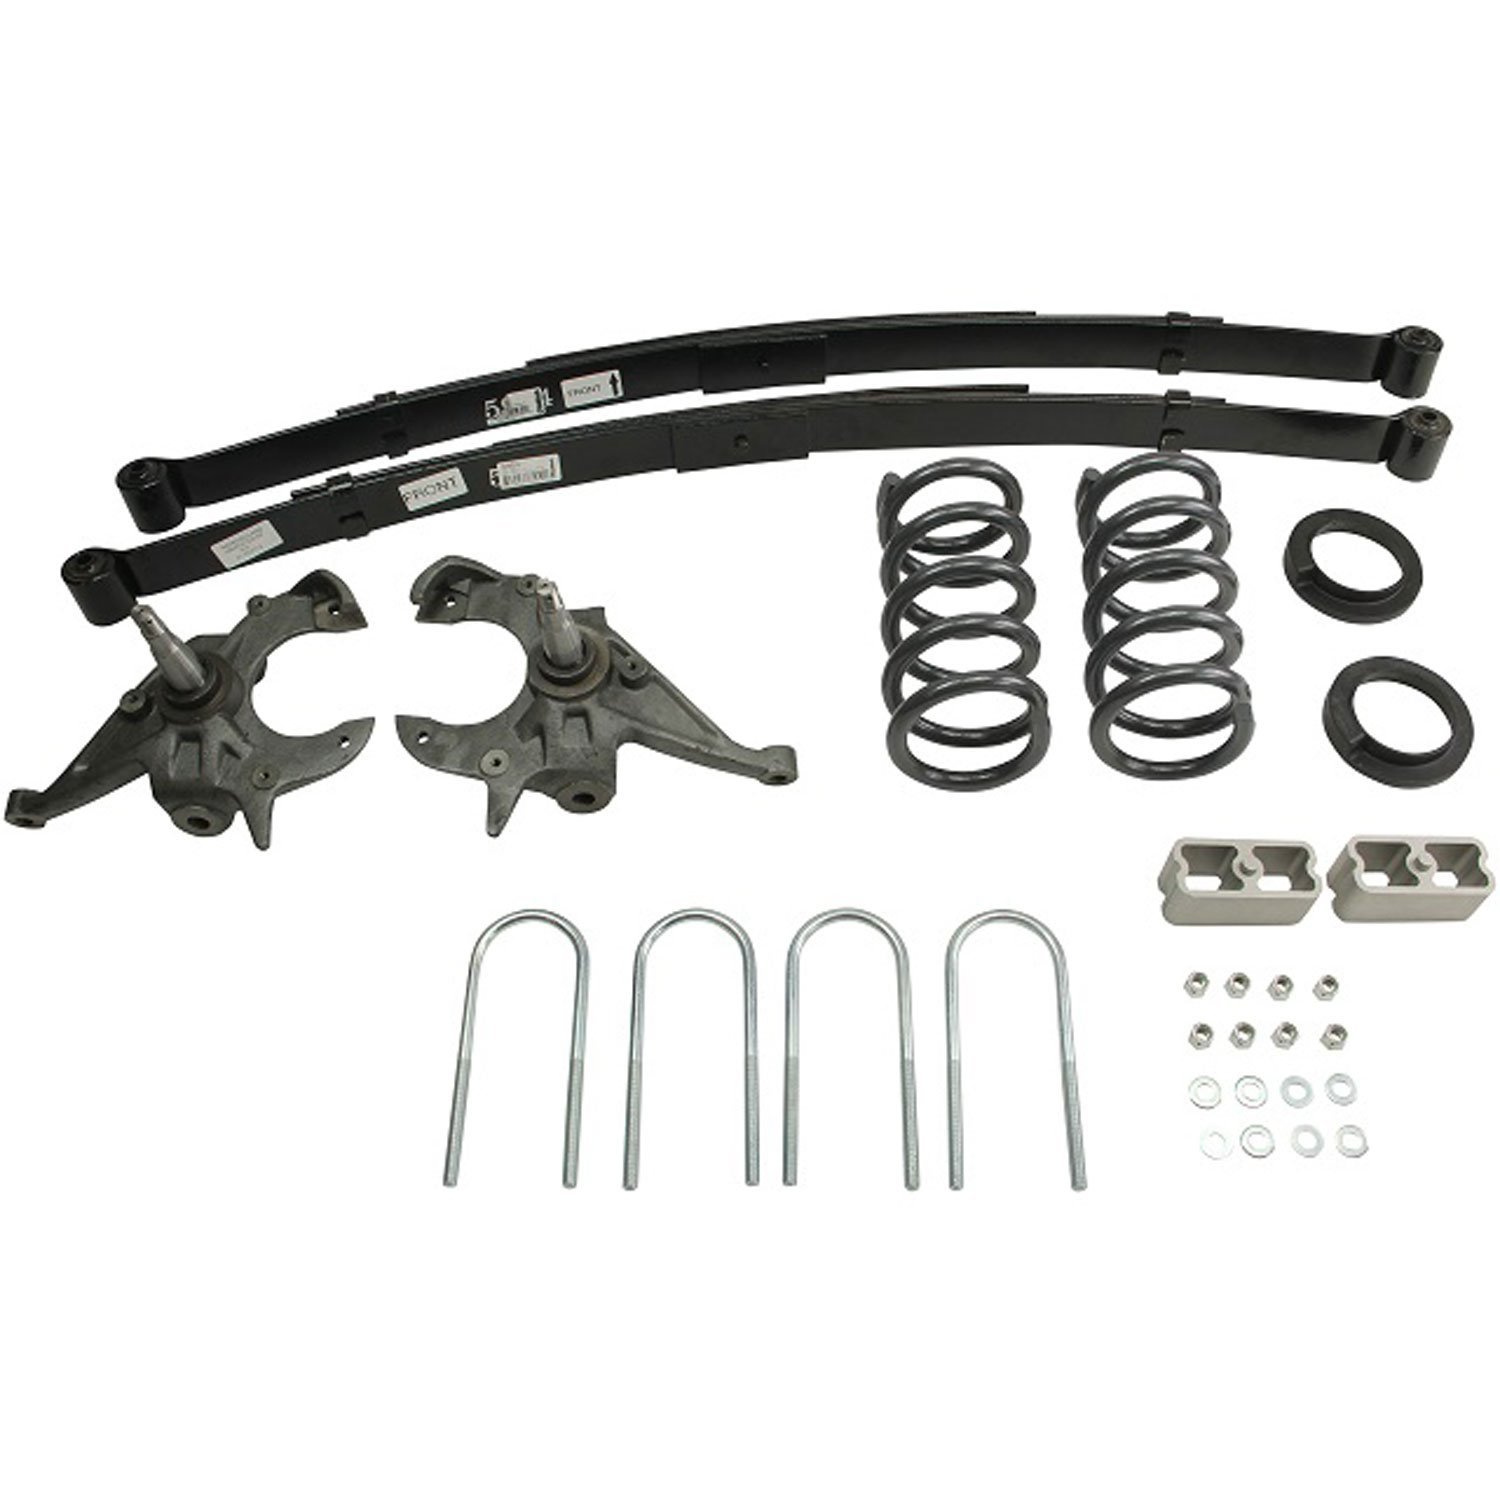 Complete Lowering Kit for 1994-2004 Chevy S10/GMC S15/Sonoma